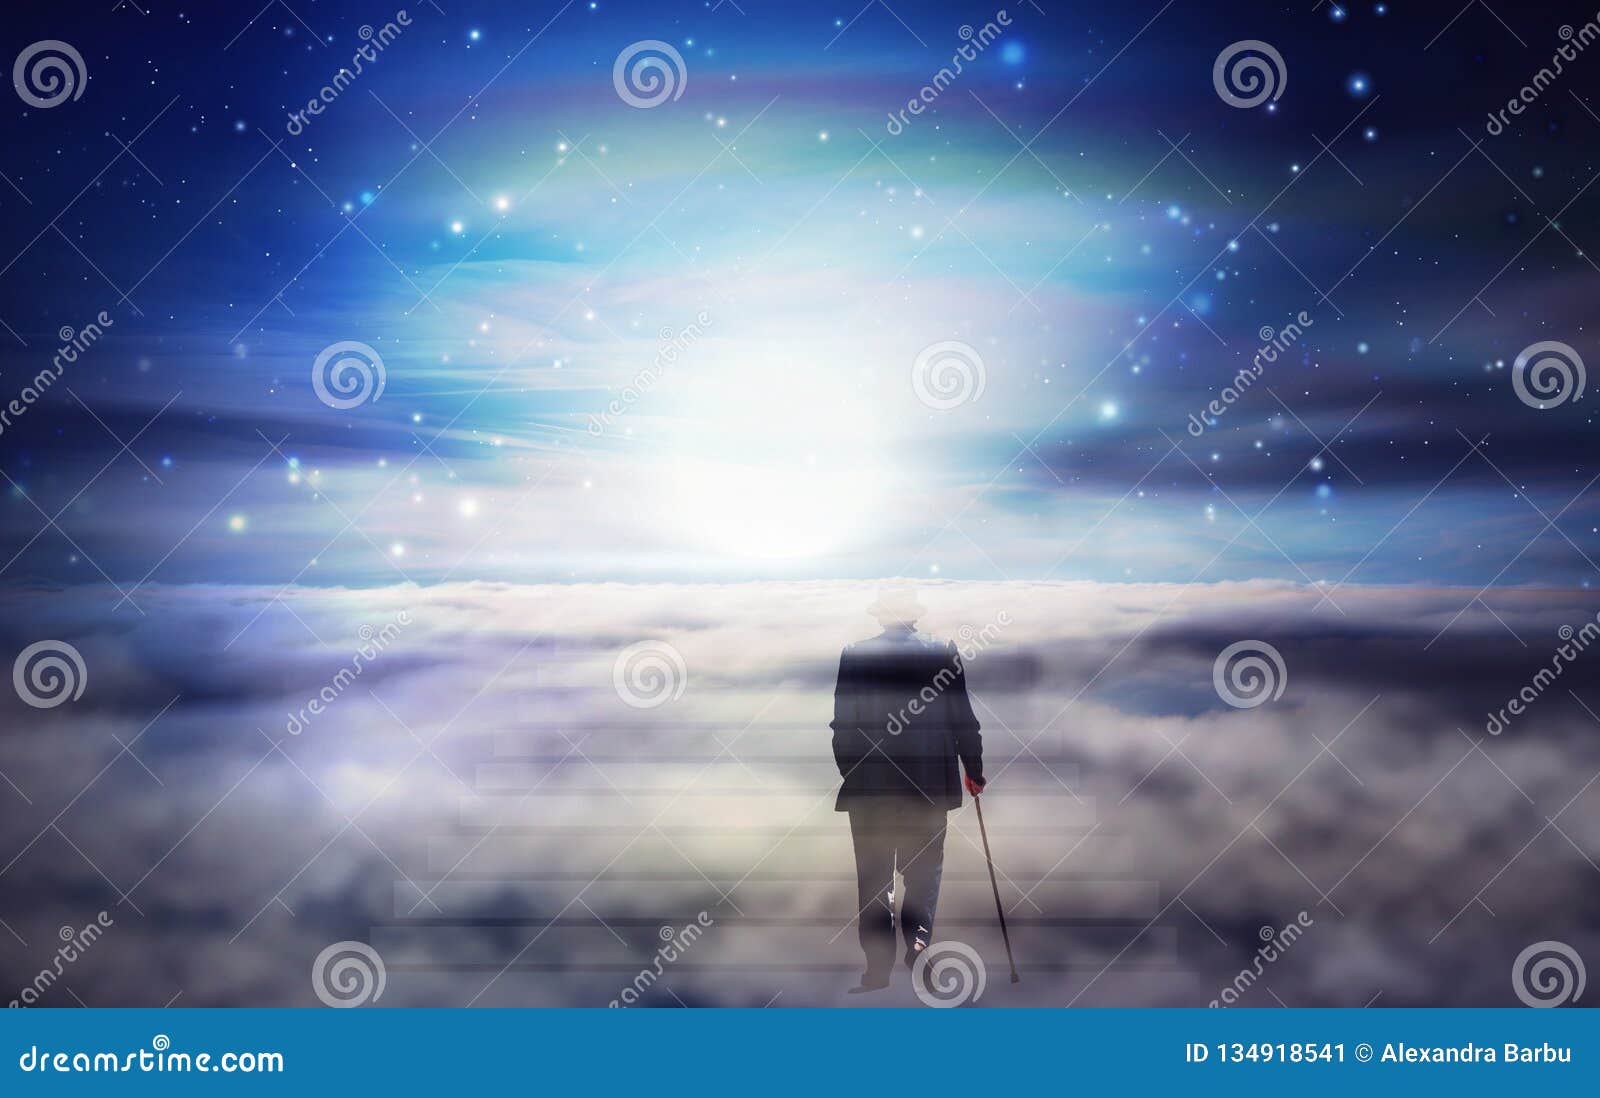 old man soul journey, bright light from heaven, way, path to god